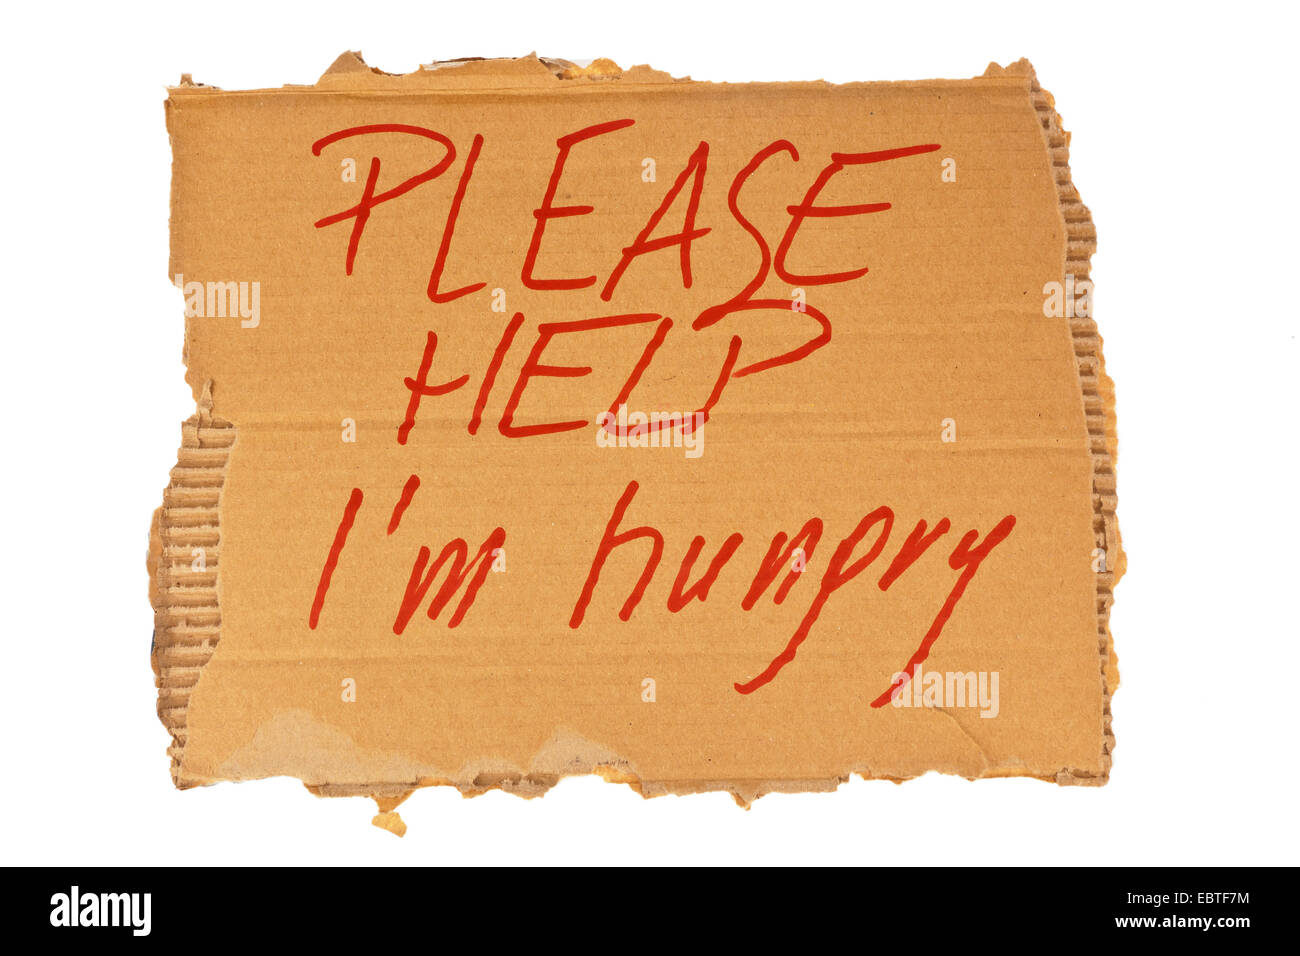 cardboard sign of a homeless person with the inscription 'Please help - I'm hungry' Stock Photo